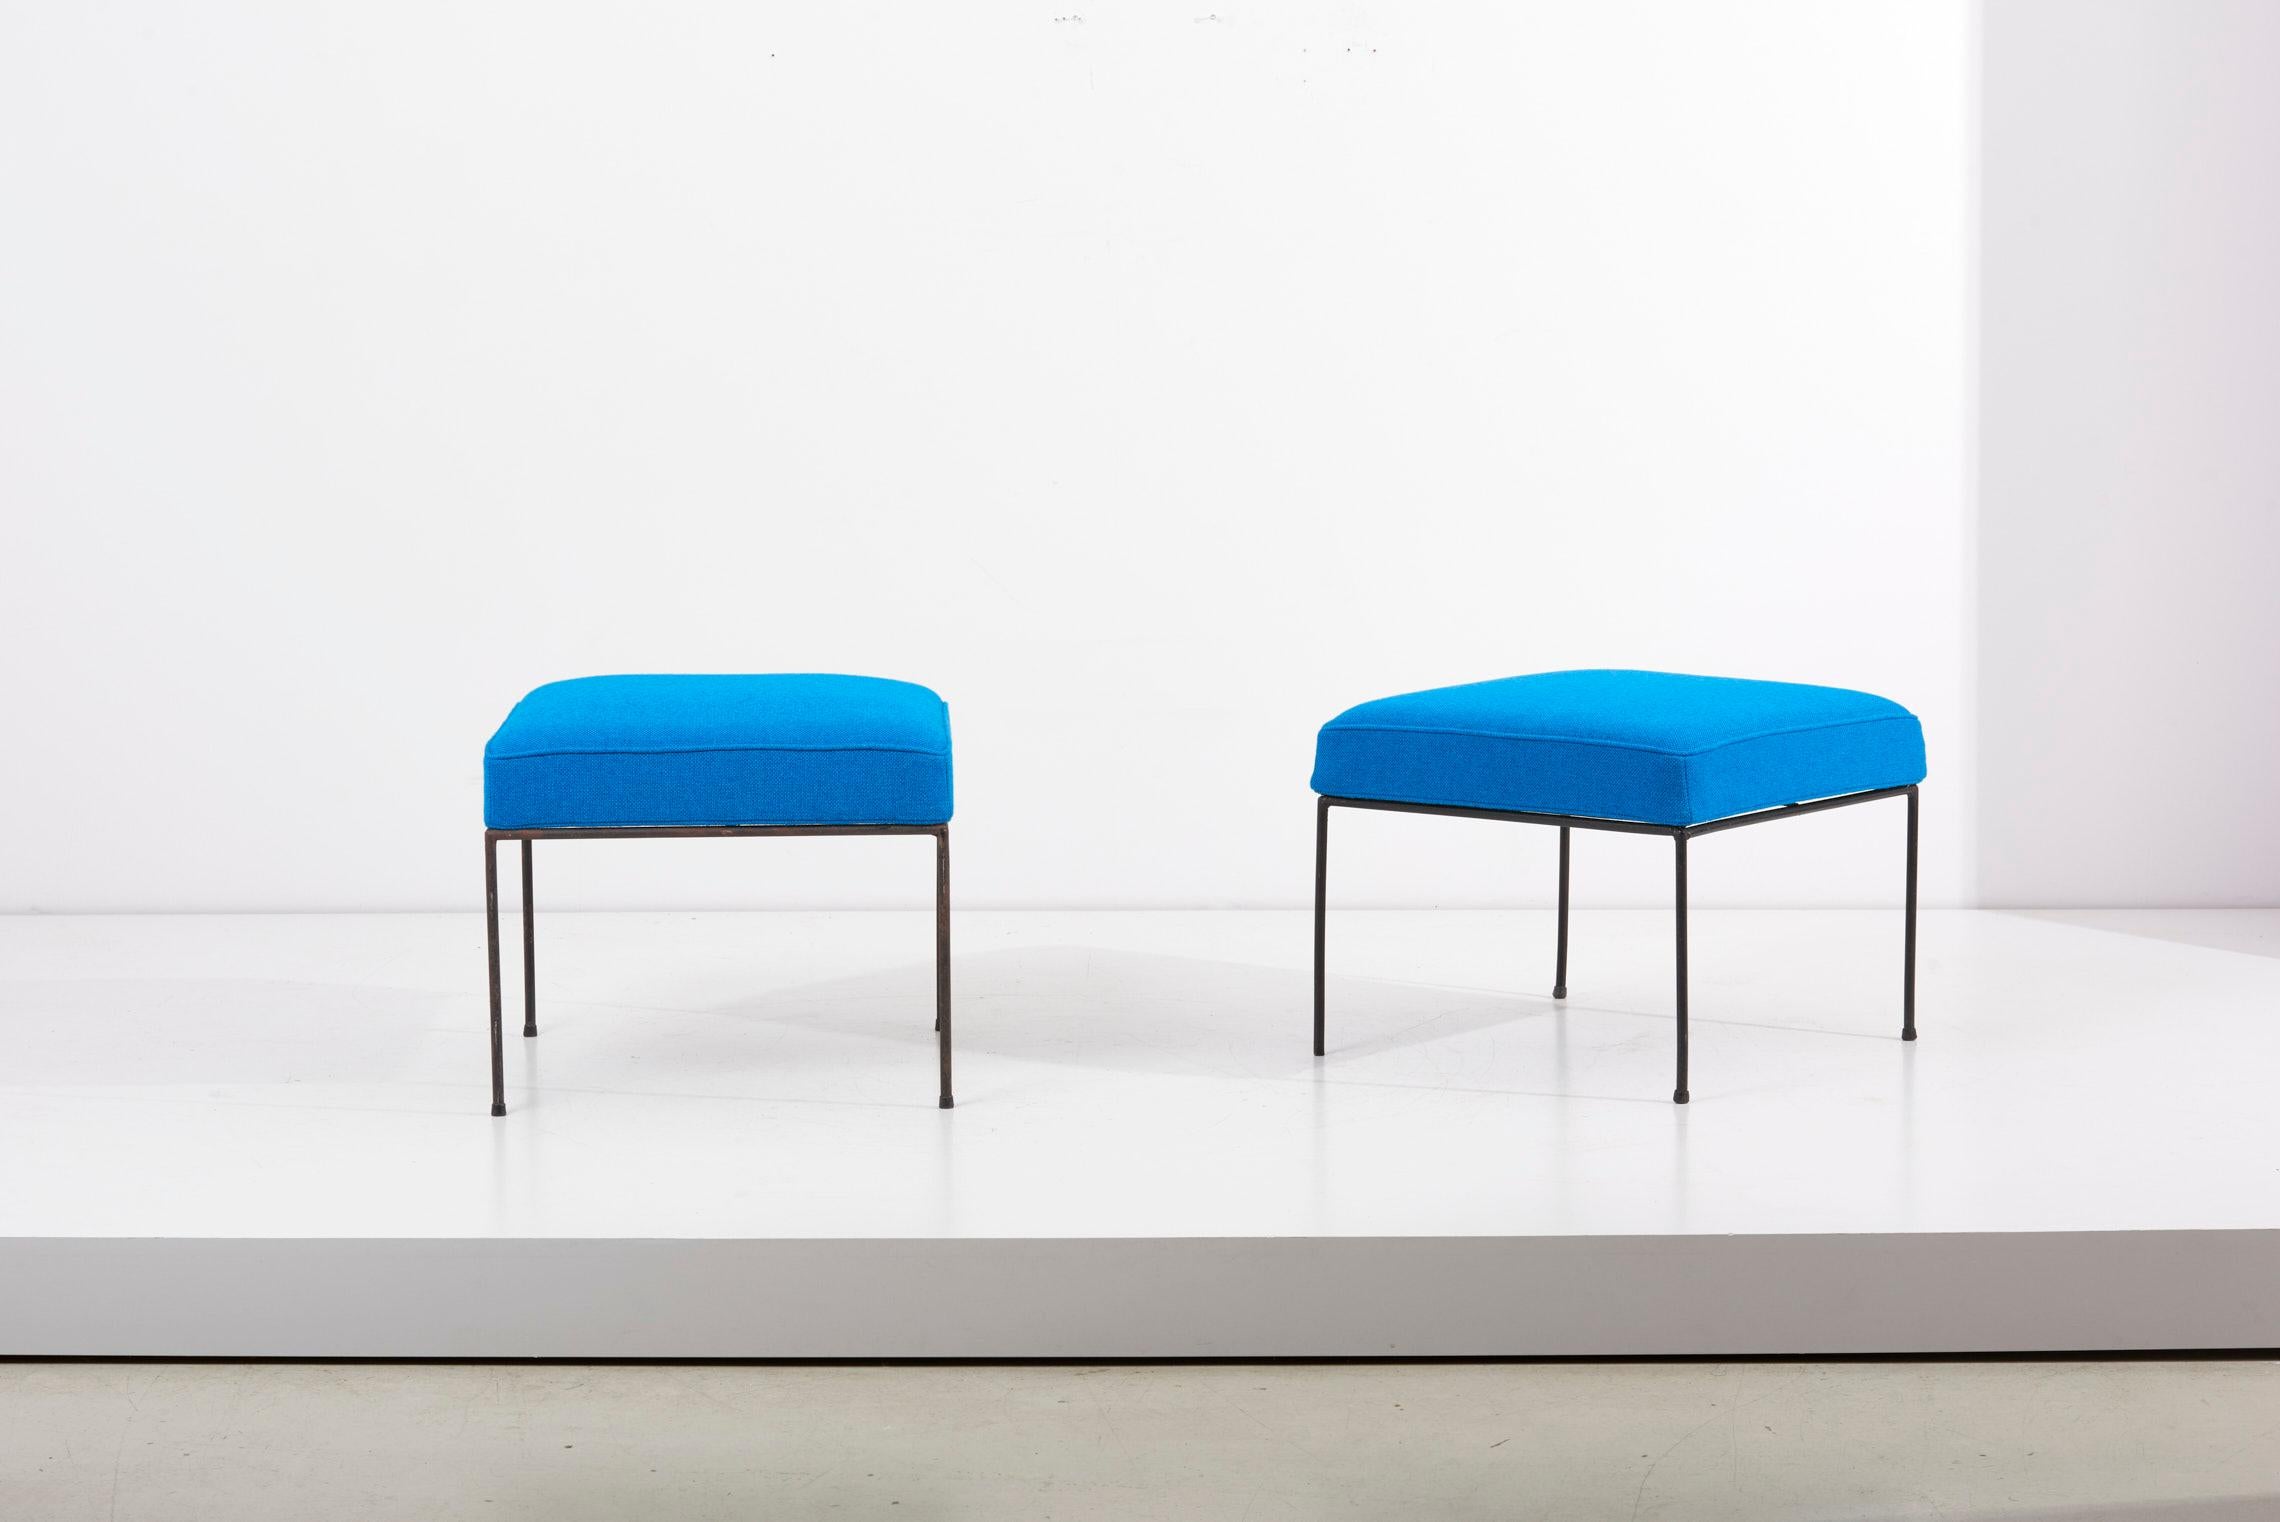 Pair of wrought iron stools, designed in 1950s by Paul McCobb and manufactured by Winchendon Furniture (Planner Group) in US.
Newly upholstered in blue Hallingdal fabric by Kvadrat.